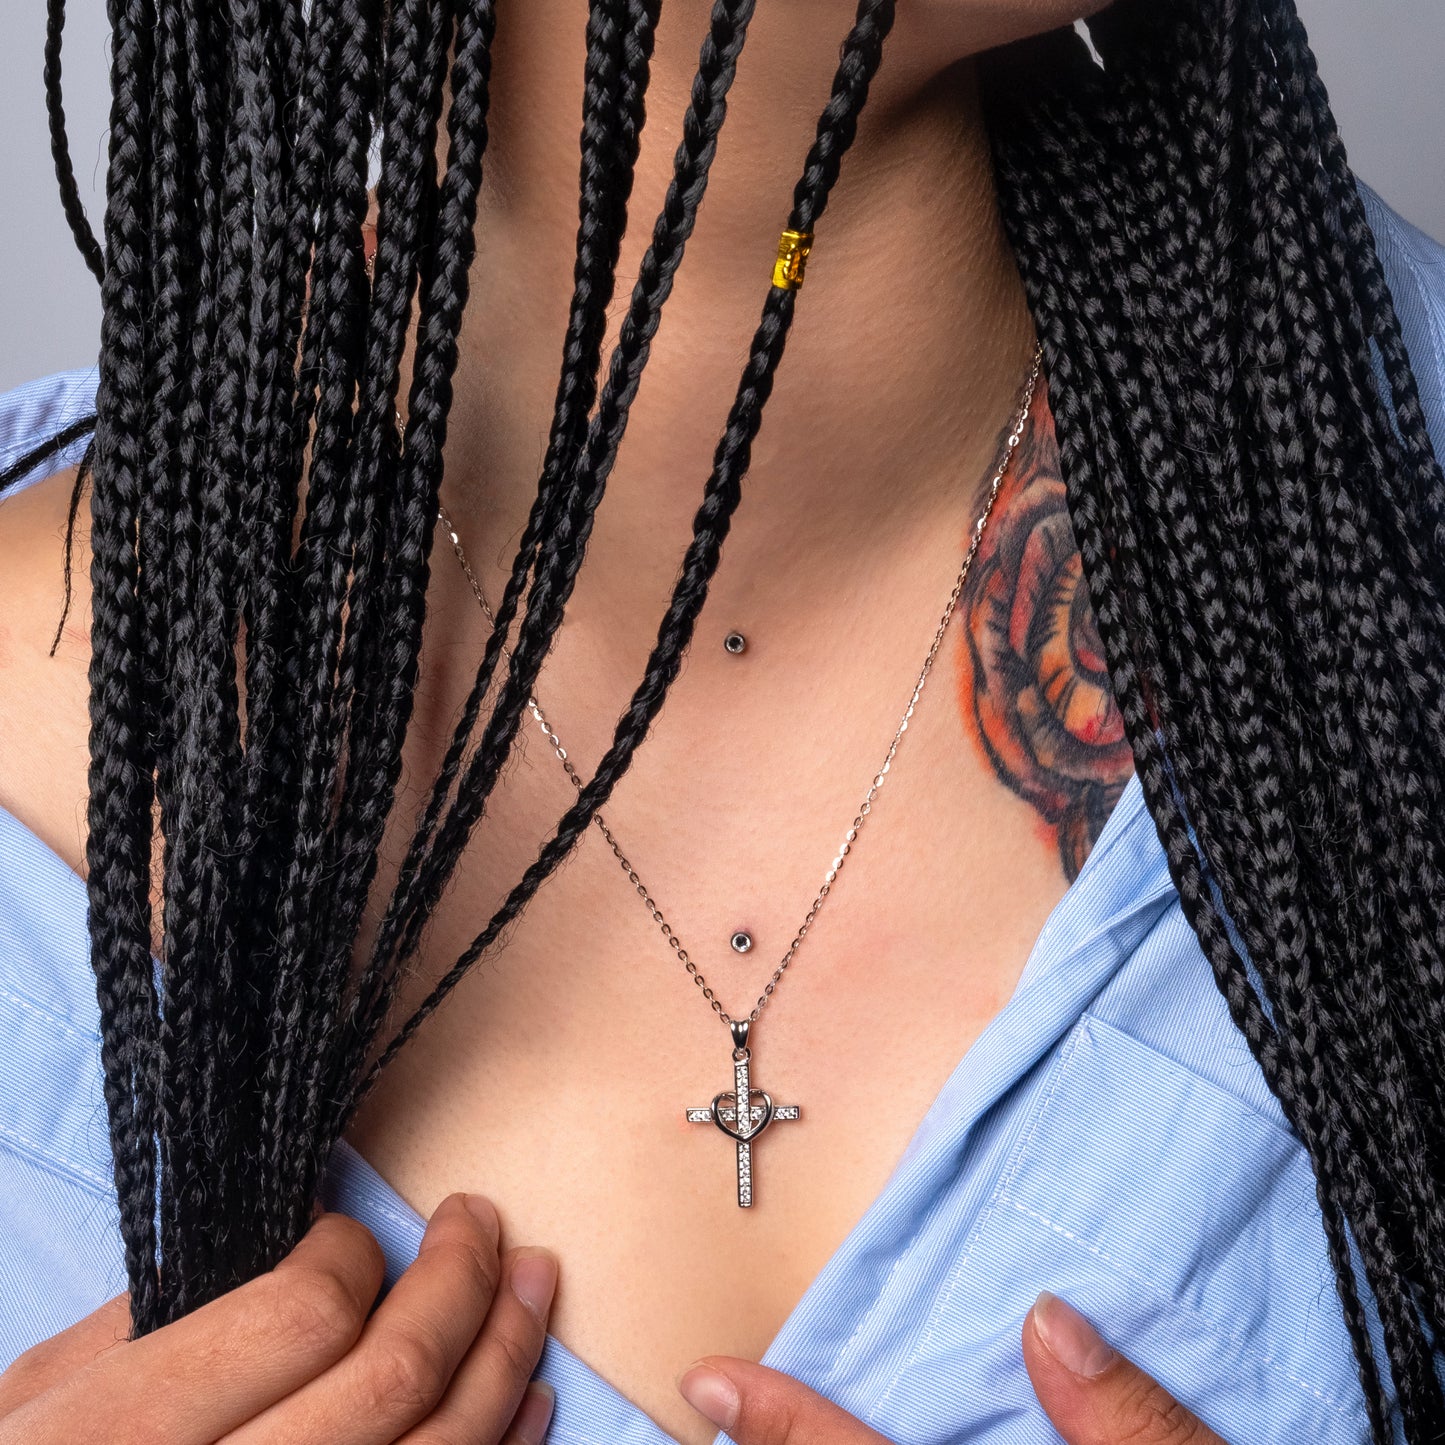 Model wearing Cross and Heart Silver Pendant with Flat cable necklace.